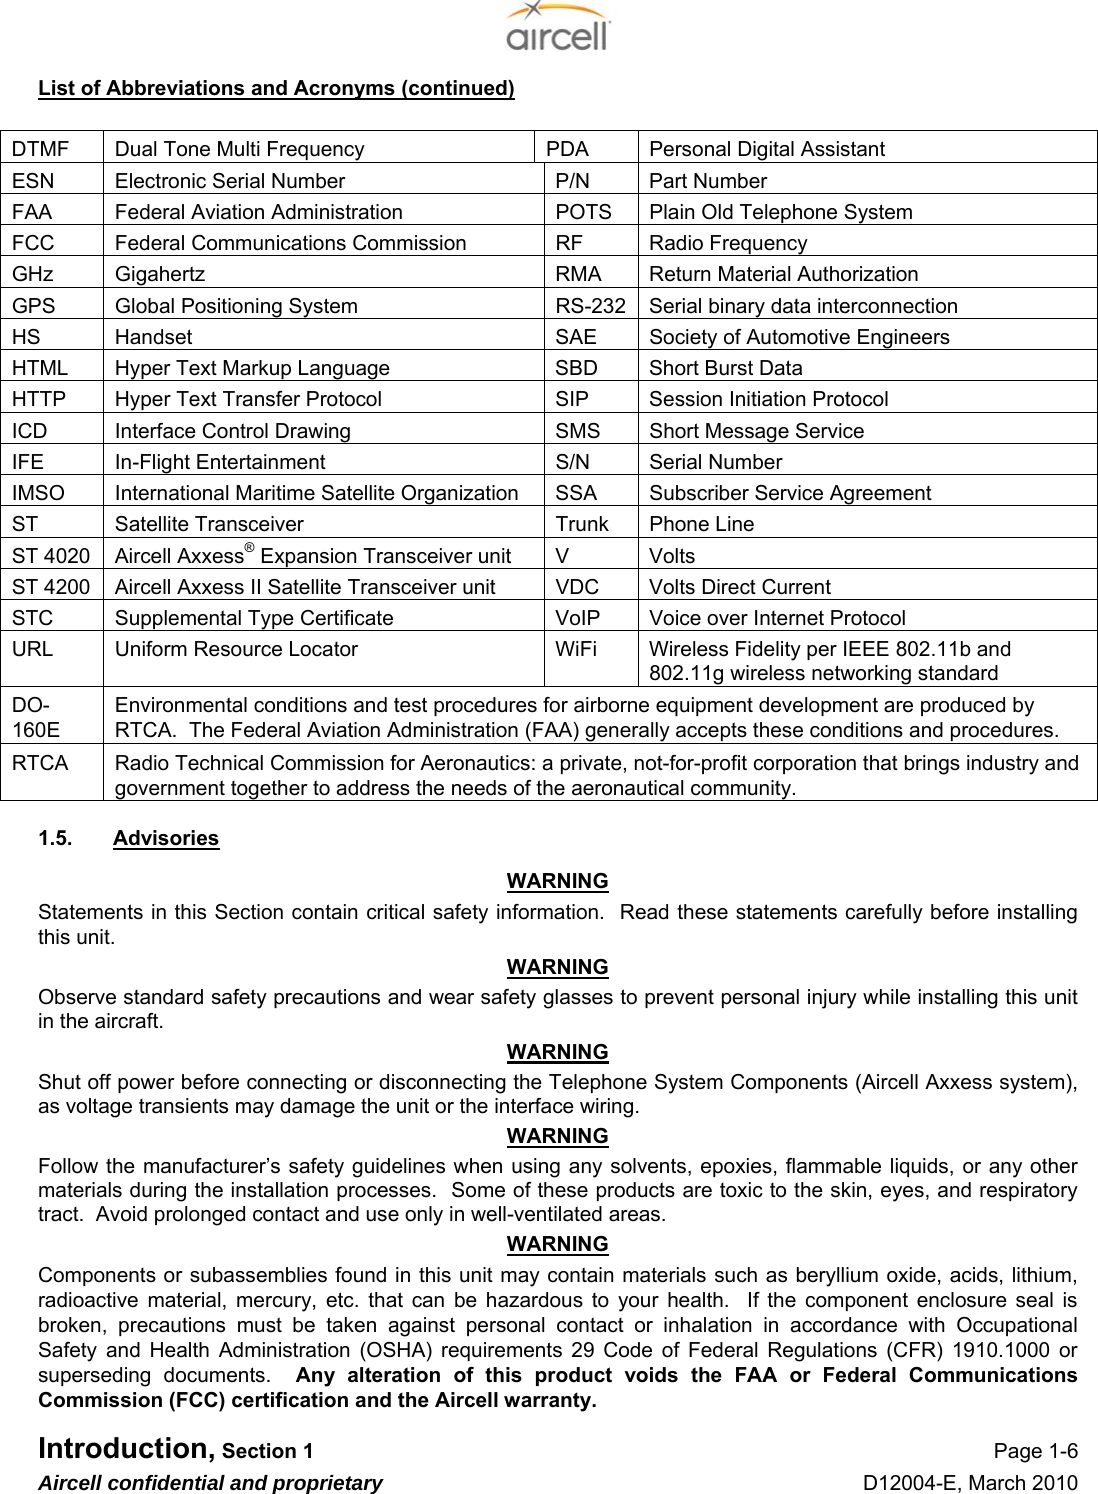  Introduction, Section 1 Page 1-6 Aircell confidential and proprietary D12004-E, March 2010 List of Abbreviations and Acronyms (continued)  DTMF  Dual Tone Multi Frequency  PDA  Personal Digital Assistant ESN  Electronic Serial Number  P/N  Part Number FAA  Federal Aviation Administration  POTS  Plain Old Telephone System FCC  Federal Communications Commission  RF  Radio Frequency GHz  Gigahertz  RMA  Return Material Authorization GPS  Global Positioning System  RS-232 Serial binary data interconnection HS  Handset  SAE  Society of Automotive Engineers HTML  Hyper Text Markup Language   SBD  Short Burst Data HTTP  Hyper Text Transfer Protocol  SIP  Session Initiation Protocol ICD  Interface Control Drawing  SMS  Short Message Service IFE  In-Flight Entertainment  S/N  Serial Number IMSO  International Maritime Satellite Organization  SSA  Subscriber Service Agreement ST  Satellite Transceiver  Trunk  Phone Line ST 4020  Aircell Axxess® Expansion Transceiver unit  V  Volts ST 4200  Aircell Axxess II Satellite Transceiver unit  VDC  Volts Direct Current STC  Supplemental Type Certificate  VoIP  Voice over Internet Protocol URL  Uniform Resource Locator   WiFi  Wireless Fidelity per IEEE 802.11b and 802.11g wireless networking standard DO-160E Environmental conditions and test procedures for airborne equipment development are produced by RTCA.  The Federal Aviation Administration (FAA) generally accepts these conditions and procedures. RTCA  Radio Technical Commission for Aeronautics: a private, not-for-profit corporation that brings industry and government together to address the needs of the aeronautical community. 1.5.  Advisories WARNING Statements in this Section contain critical safety information.  Read these statements carefully before installing this unit. WARNING Observe standard safety precautions and wear safety glasses to prevent personal injury while installing this unit in the aircraft. WARNING Shut off power before connecting or disconnecting the Telephone System Components (Aircell Axxess system), as voltage transients may damage the unit or the interface wiring. WARNING Follow the manufacturer’s safety guidelines when using any solvents, epoxies, flammable liquids, or any other materials during the installation processes.  Some of these products are toxic to the skin, eyes, and respiratory tract.  Avoid prolonged contact and use only in well-ventilated areas. WARNING Components or subassemblies found in this unit may contain materials such as beryllium oxide, acids, lithium, radioactive material, mercury, etc. that can be hazardous to your health.  If the component enclosure seal is broken, precautions must be taken against personal contact or inhalation in accordance with Occupational Safety and Health Administration (OSHA) requirements 29 Code of Federal Regulations (CFR) 1910.1000 or superseding documents.  Any alteration of this product voids the FAA or Federal Communications Commission (FCC) certification and the Aircell warranty. 